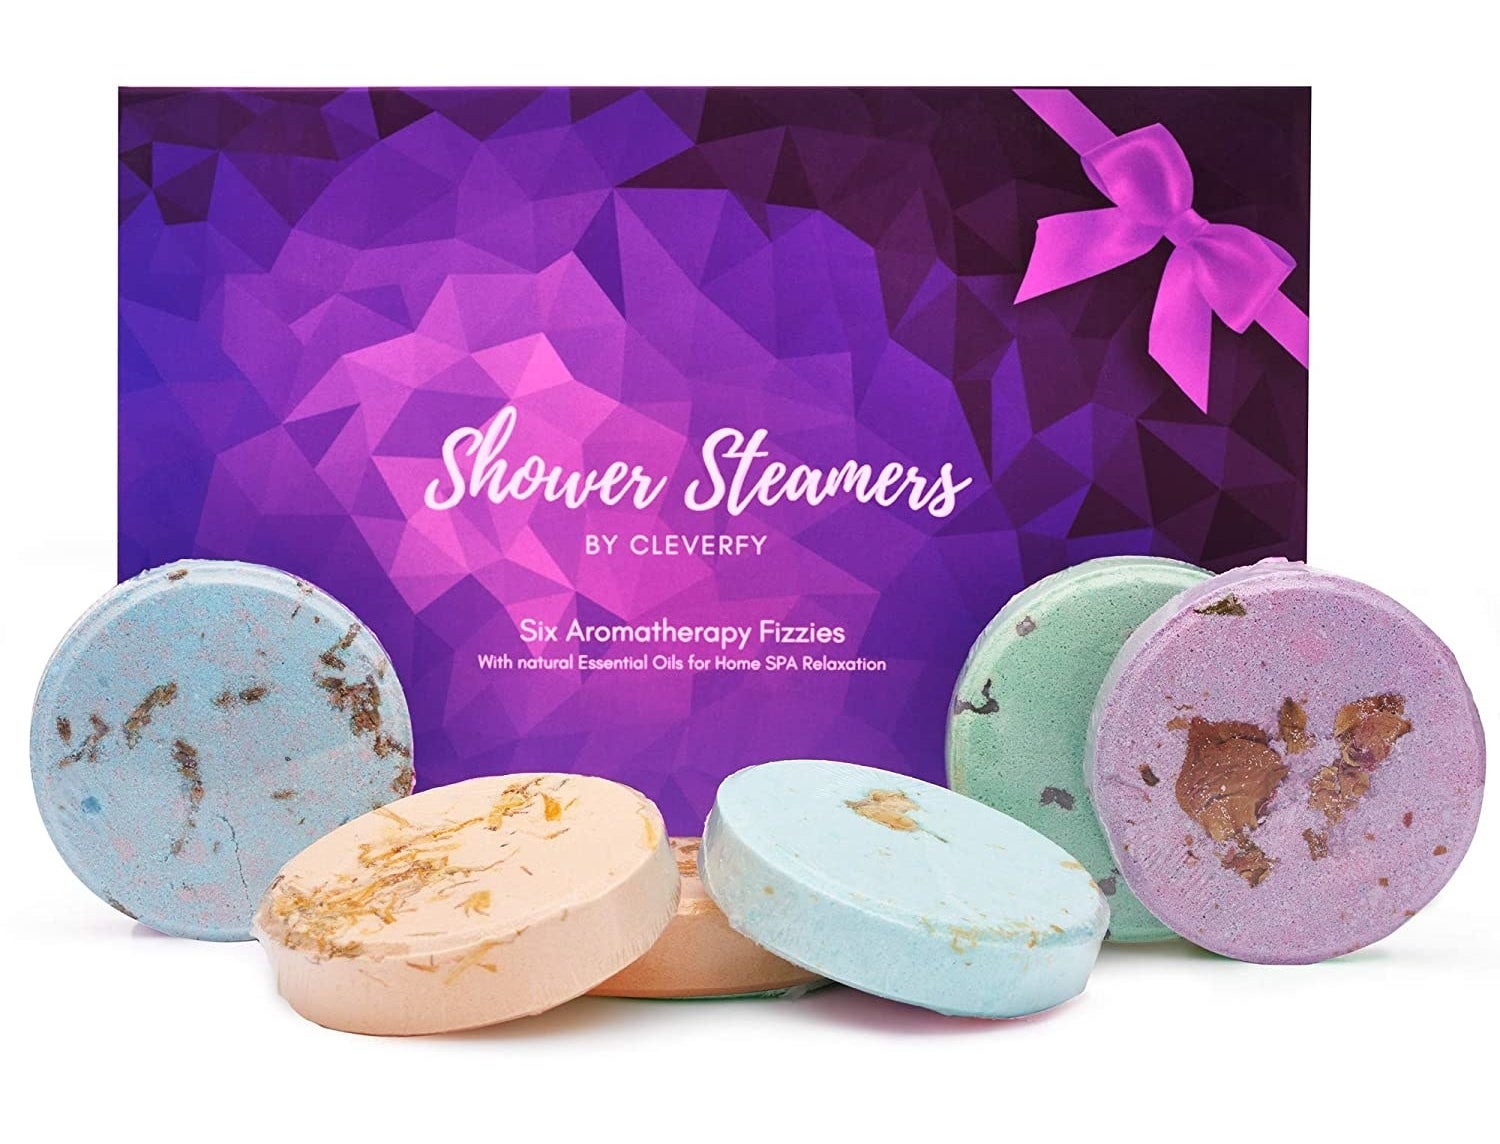 The steamers next to their packaging